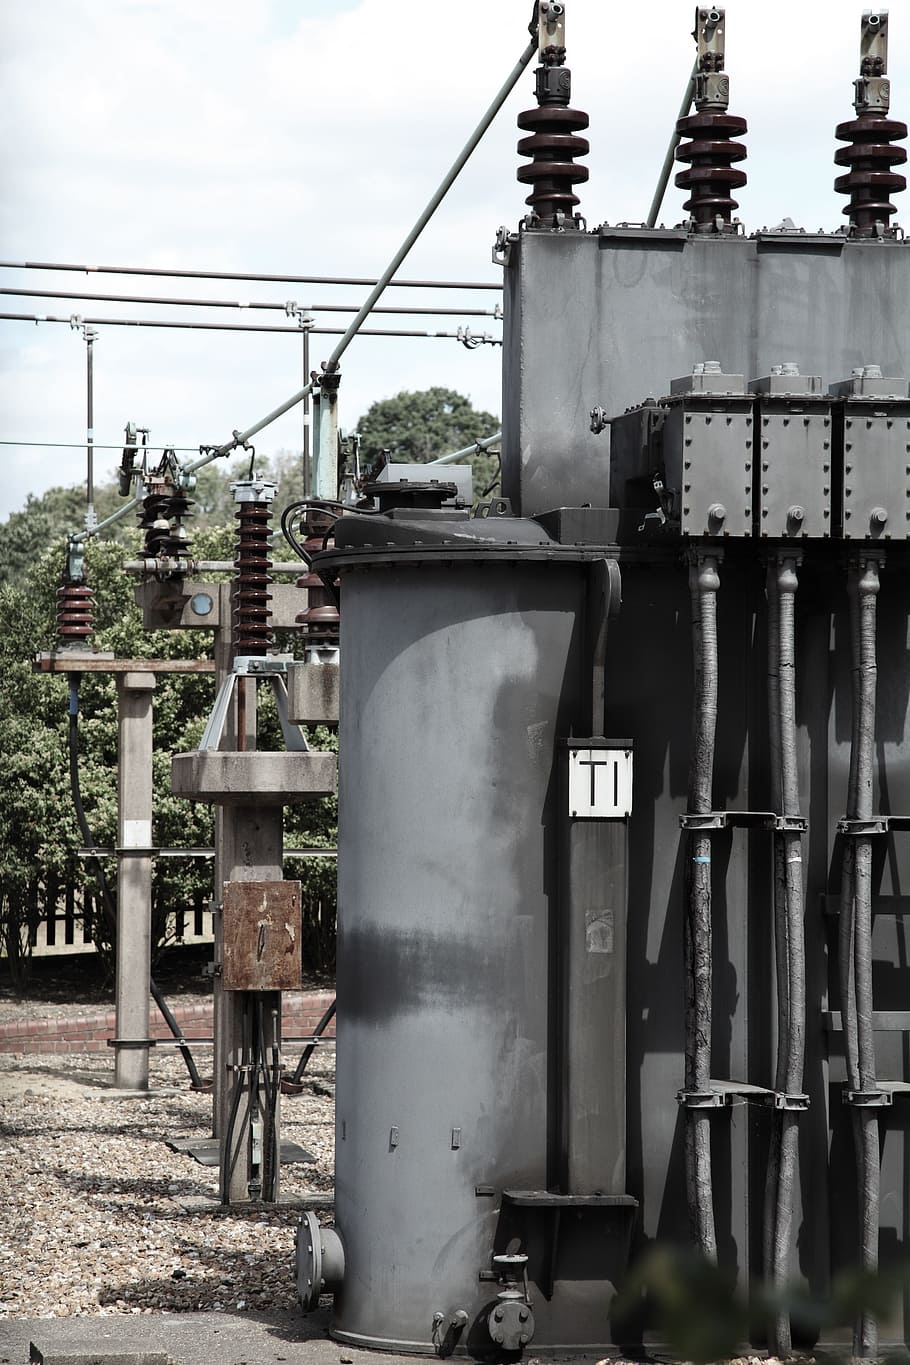 gray steel electricity transformer during daytime, Cable, Circuit